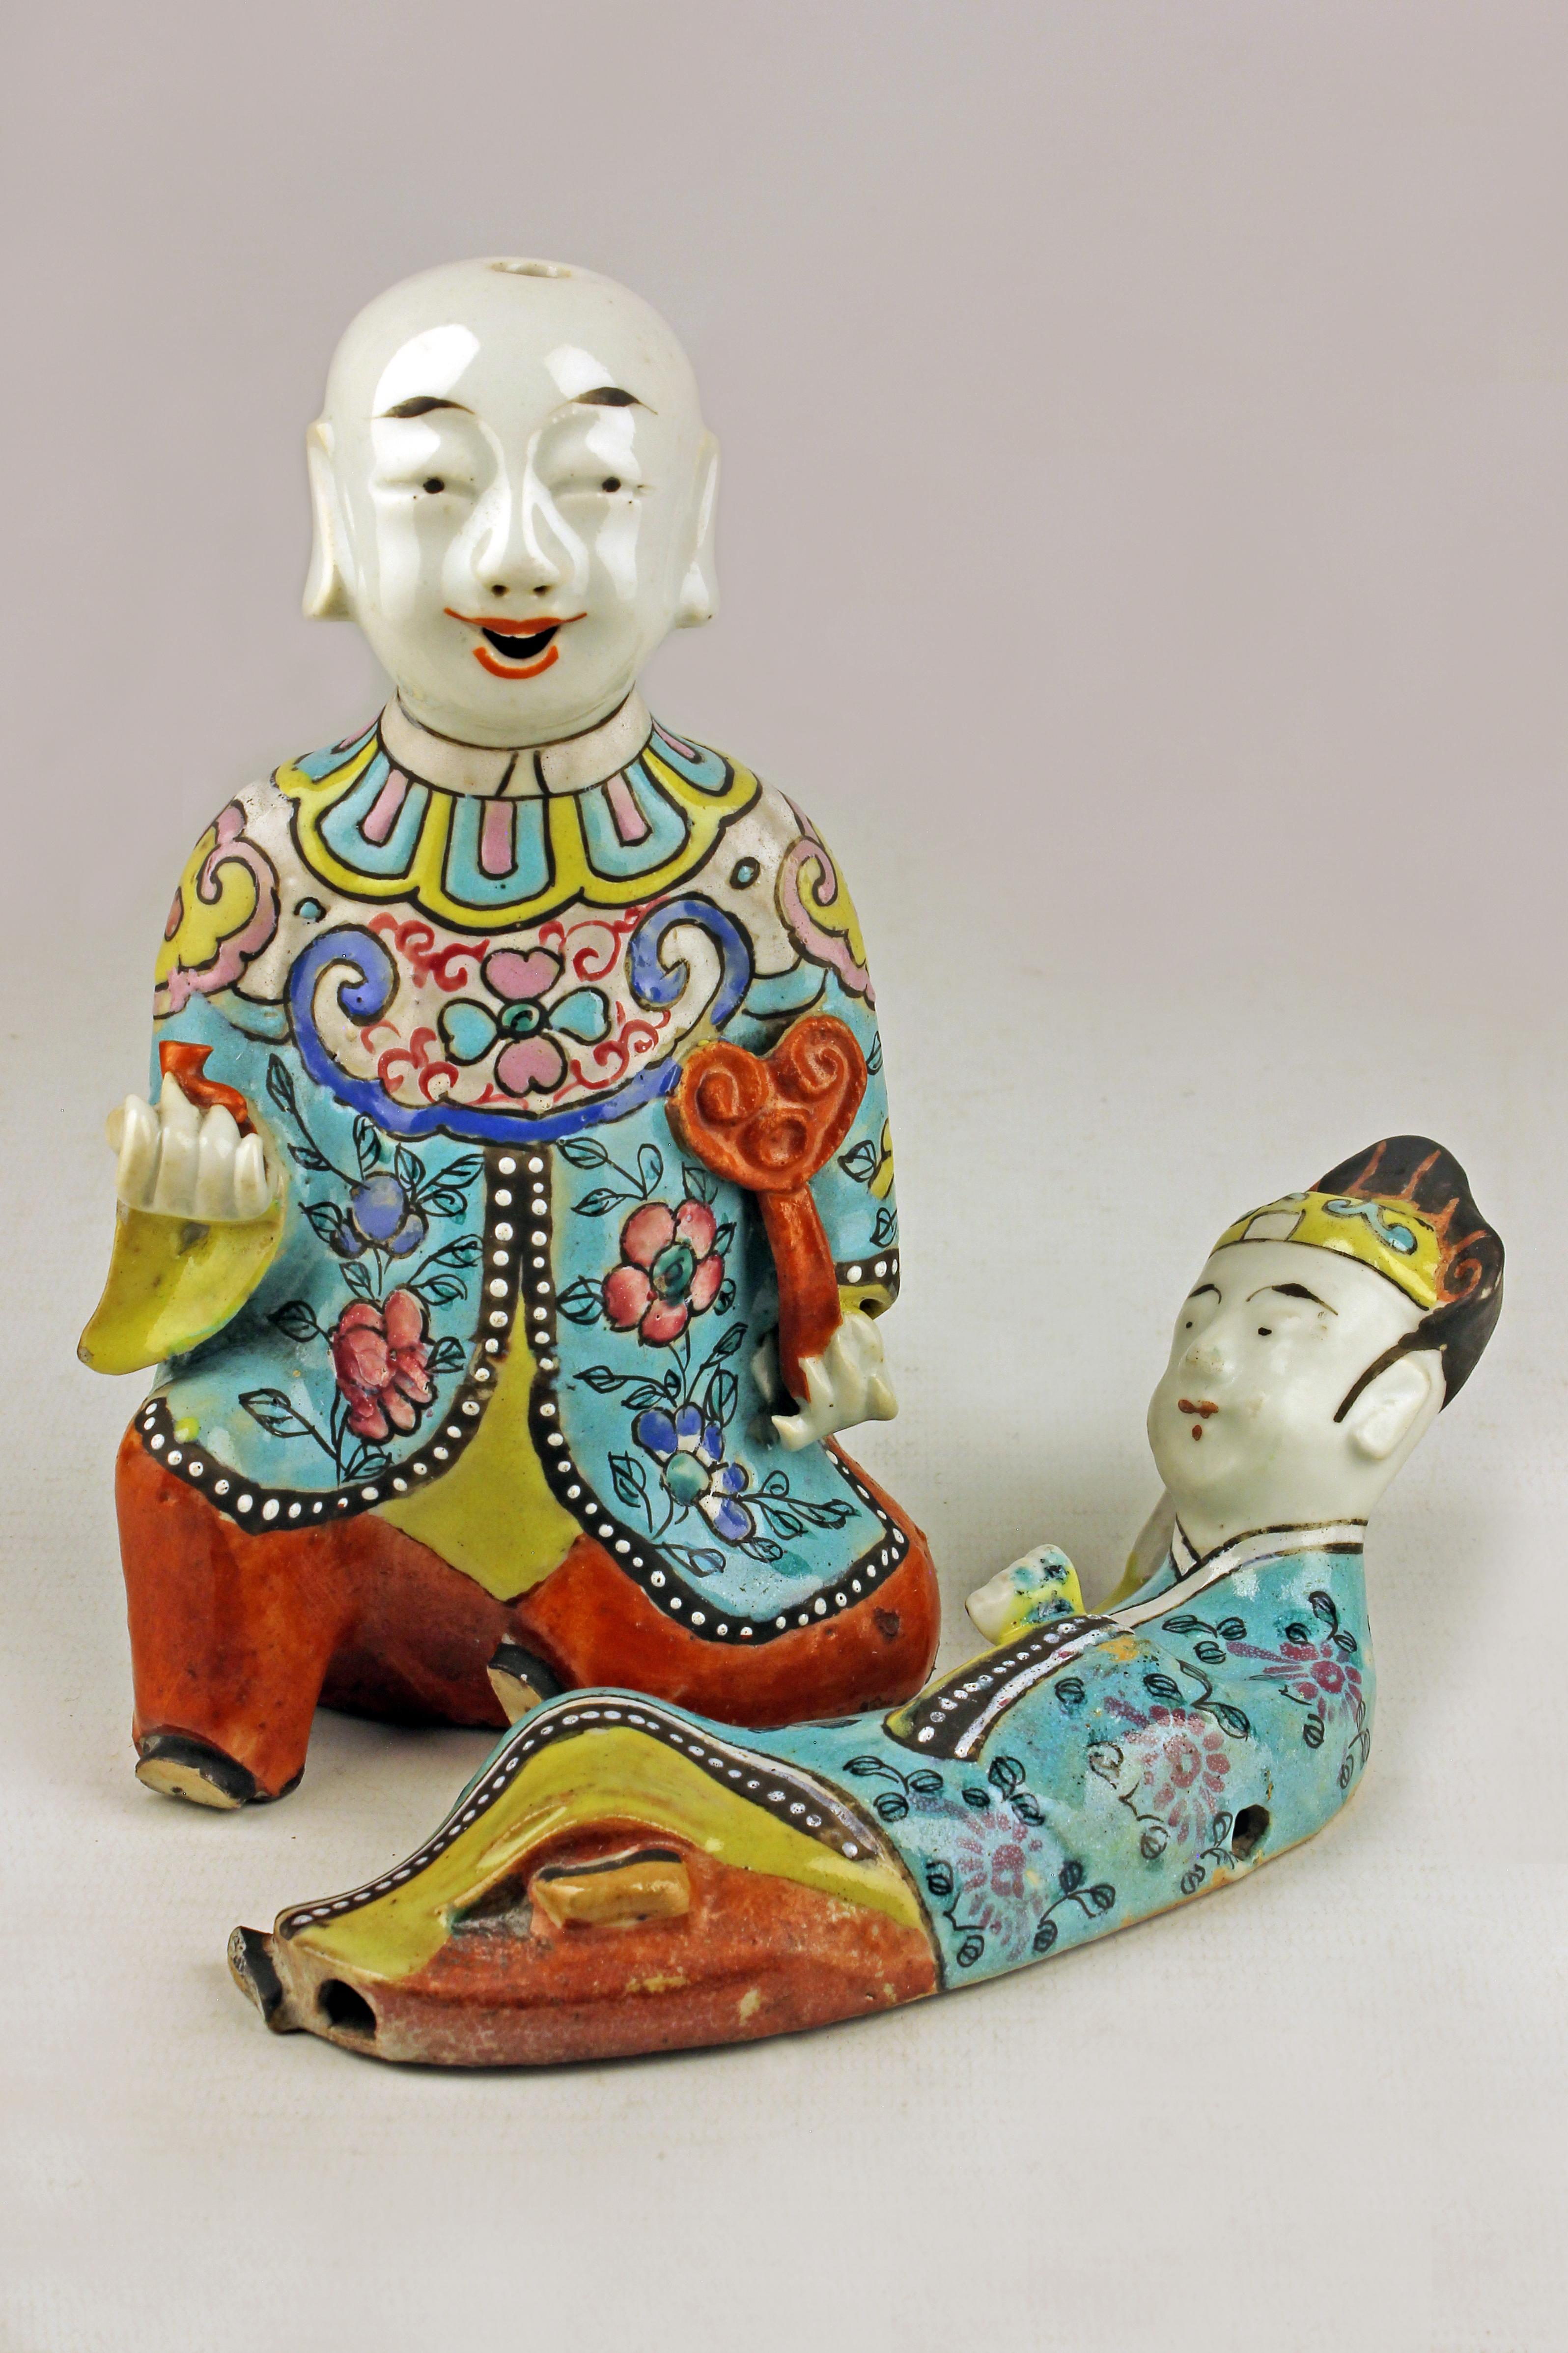 Pair of Mid-19th century/Qing dinasty enameled chinese porcelain figurines depicting a laughing boy kneeling and another lying down 

By: unknown
Material: porcelain, ceramic, enamel, paint
Technique: pressed, molded, glazed, polished, enameled,